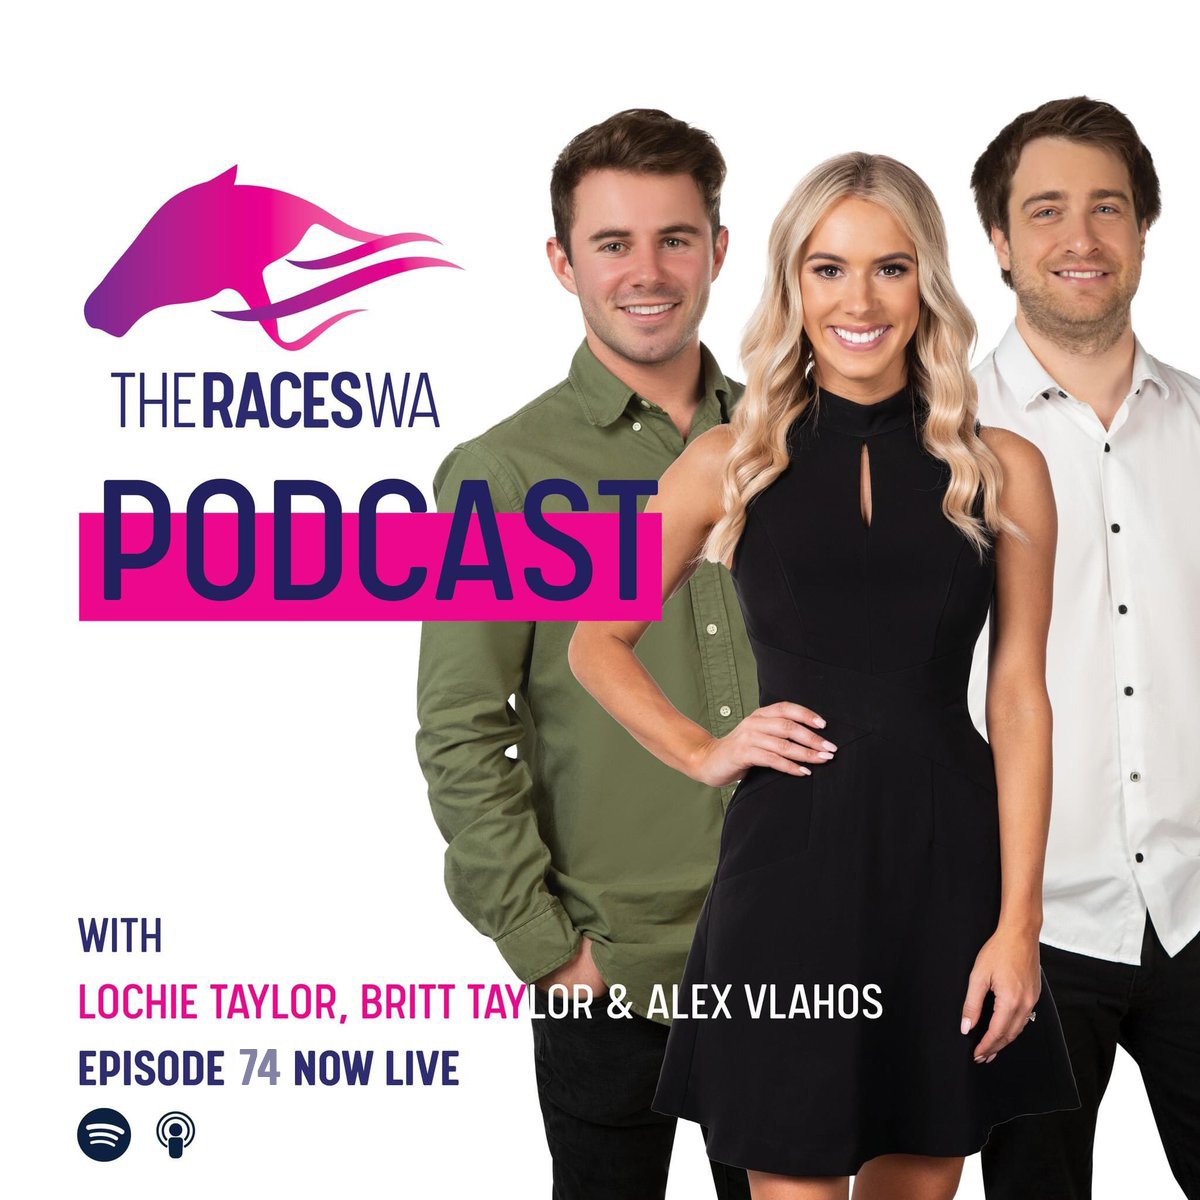 Podcast Team Take To The Sky, The East Coast Raiders Arrive, Macca's Hilarious Tipping Triumph Trumpet, Britt's Dream Doesn't Come True As Winx Filly Smashes Records Apple: apple.co/3dJtTEN Spotify: spoti.fi/3foYA2j